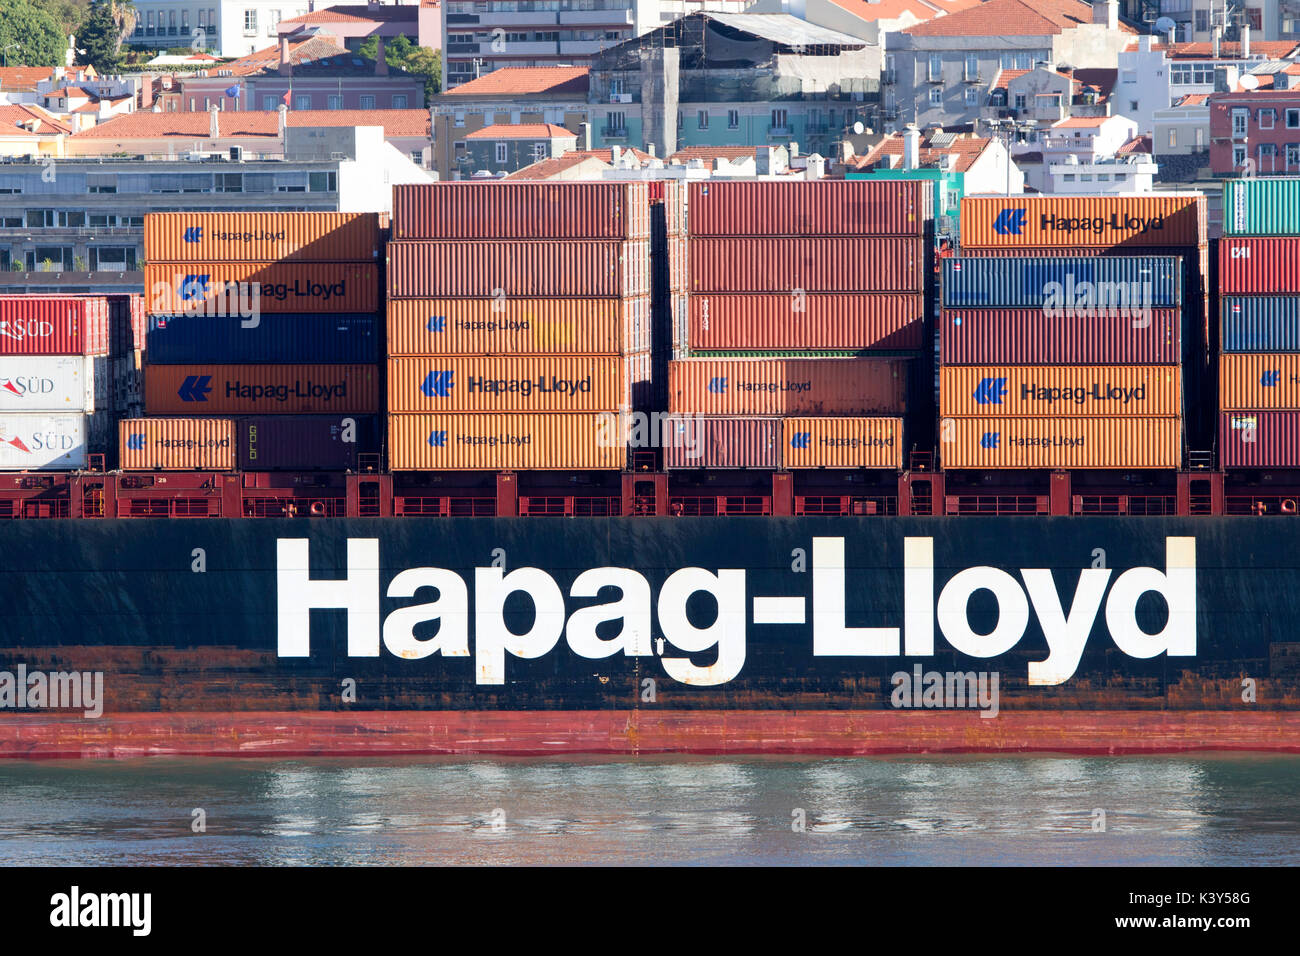 Hapag Lloyd cargo container shipping line Stock Photo - Alamy